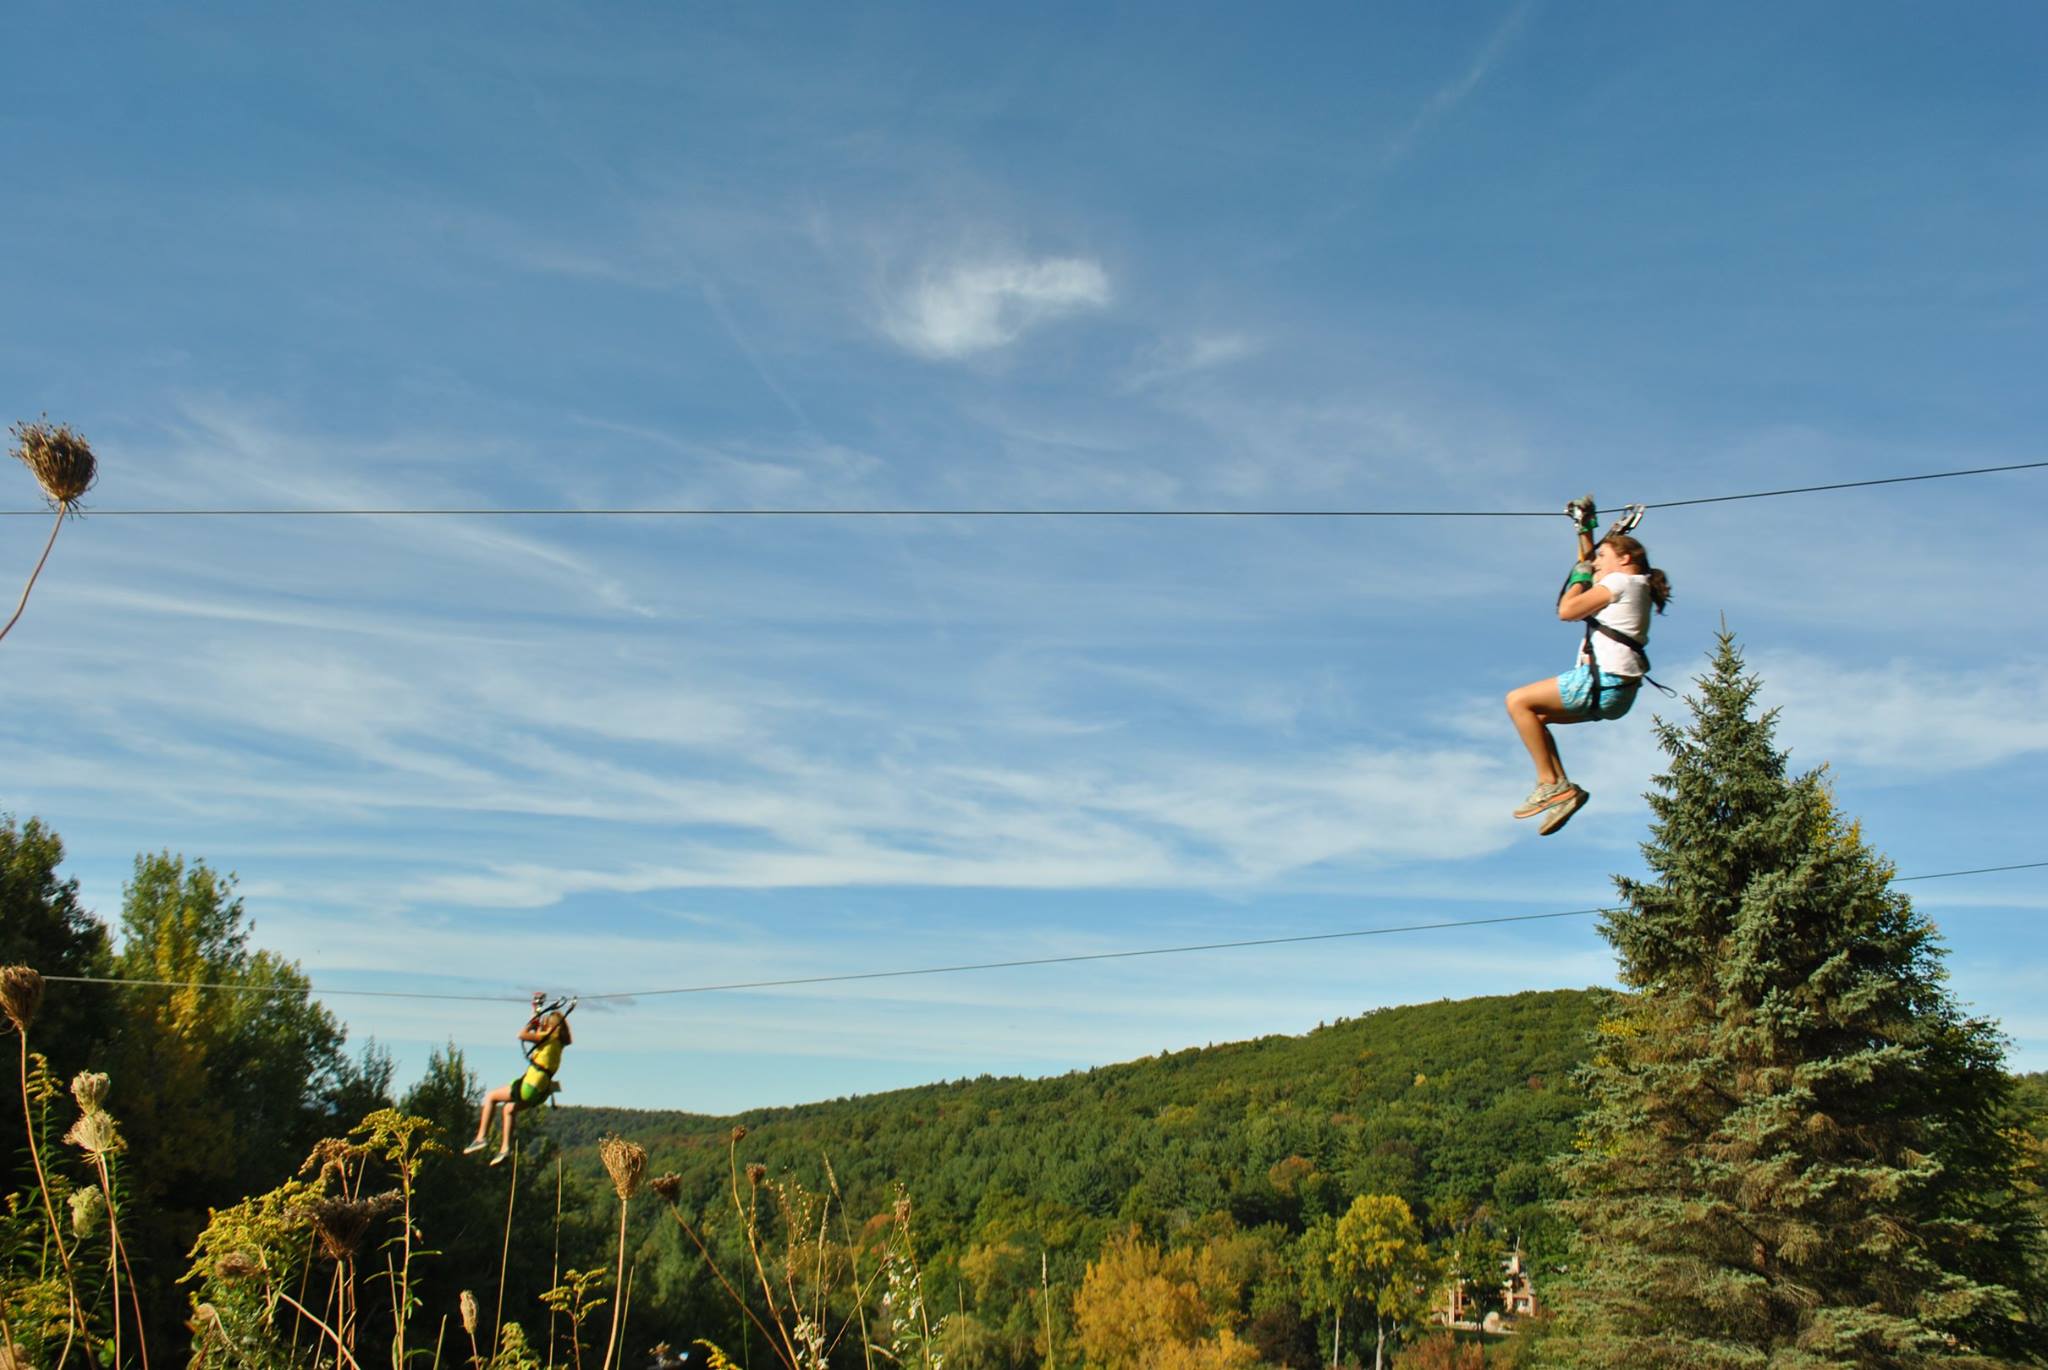 catamount mountain adventure park in the berkshires ma